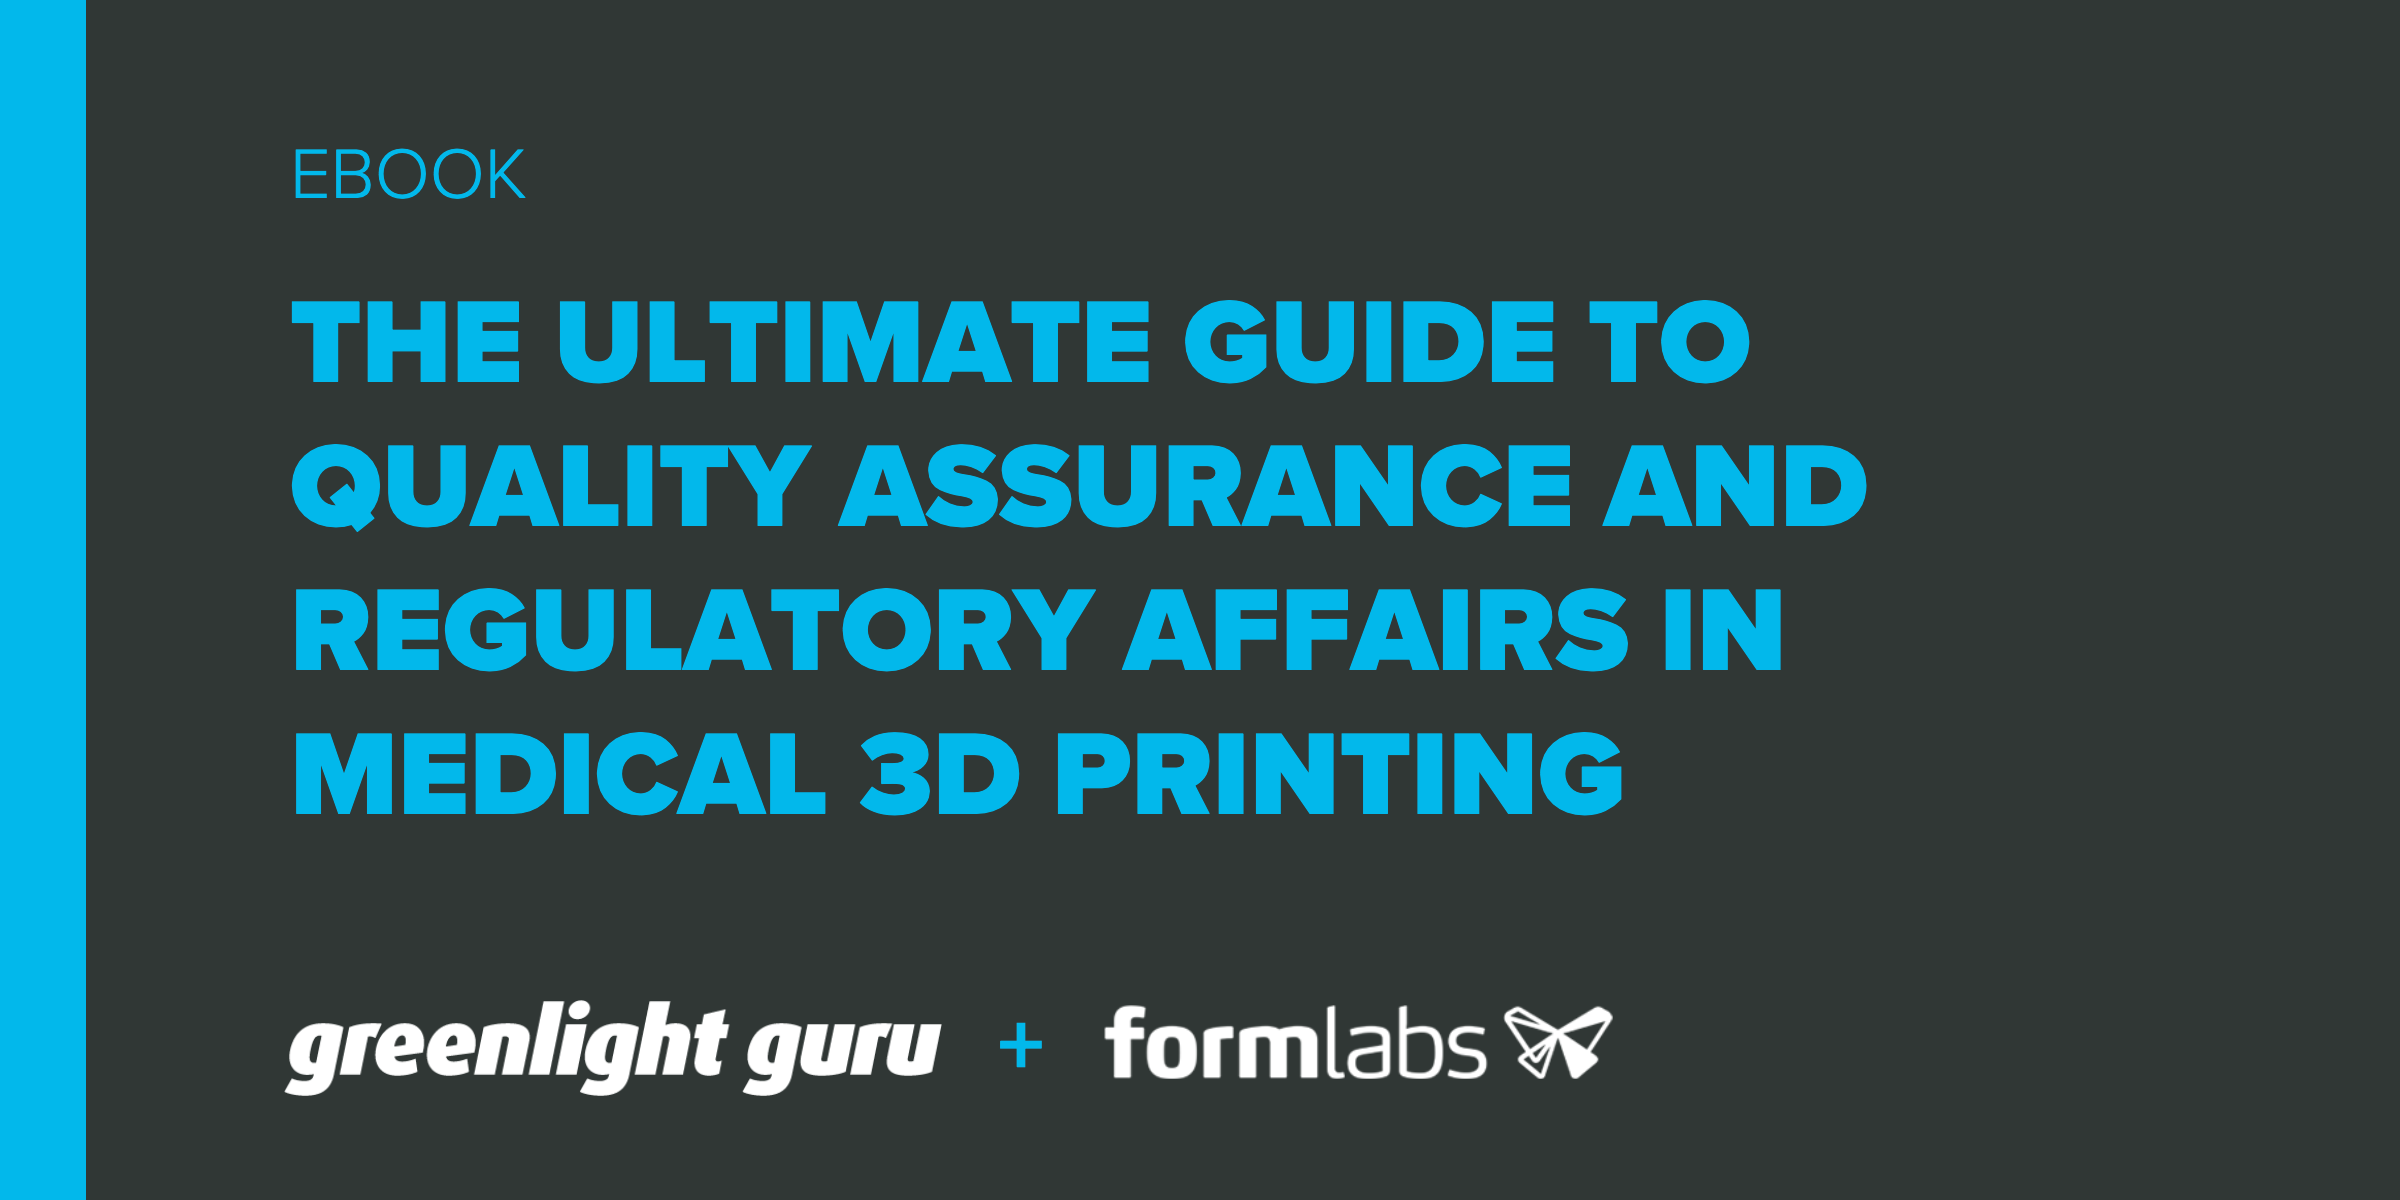 https://www.greenlight.guru/hubfs/The%20Ultimate%20Guide%20to%20Quality%20Assurance%20and%20Regulatory%20Affairs%20in%20Medical%203D%20Printing-1.png#keepProtocol